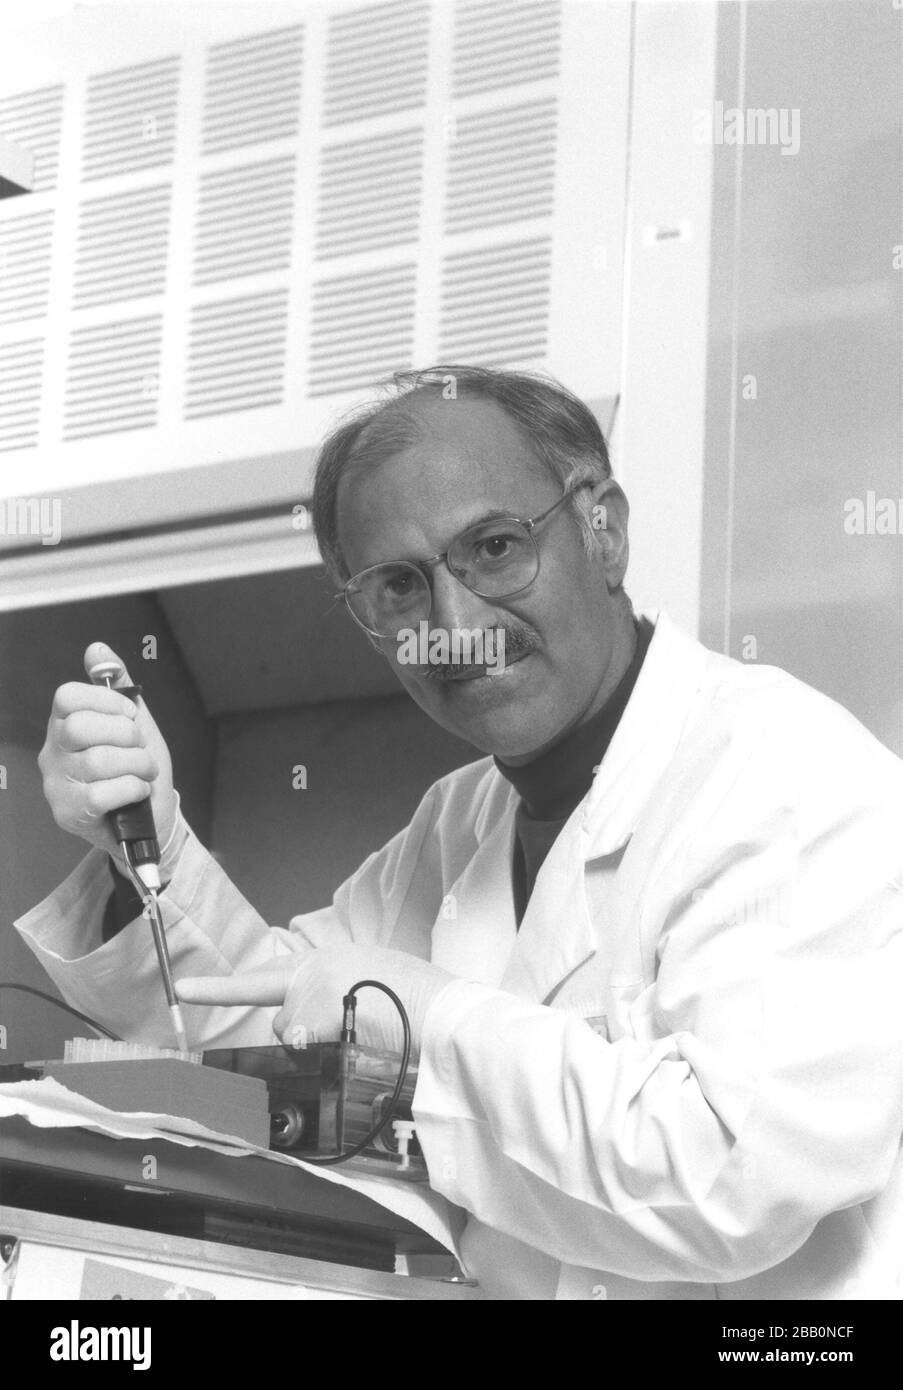 'English:  Title Dhar, Ravi Description Basic Research Laboratory, Center for Cancer Research, National Cancer Institute. See also http://ccr.cancer.gov/Staff/Staff.asp?StaffID=380. Topics/Categories  National Cancer Institute, People Type B&W, Photo Source National Cancer Institute; November 1995; This image was released by the National Cancer Institute, an agency part of the National Institutes of Health, with the ID 68 (image) (next). This tag does not indicate the copyright status of the attached work. A normal copyright tag is still required. See Commons:Licensing.   Deutsch | English | f Stock Photo